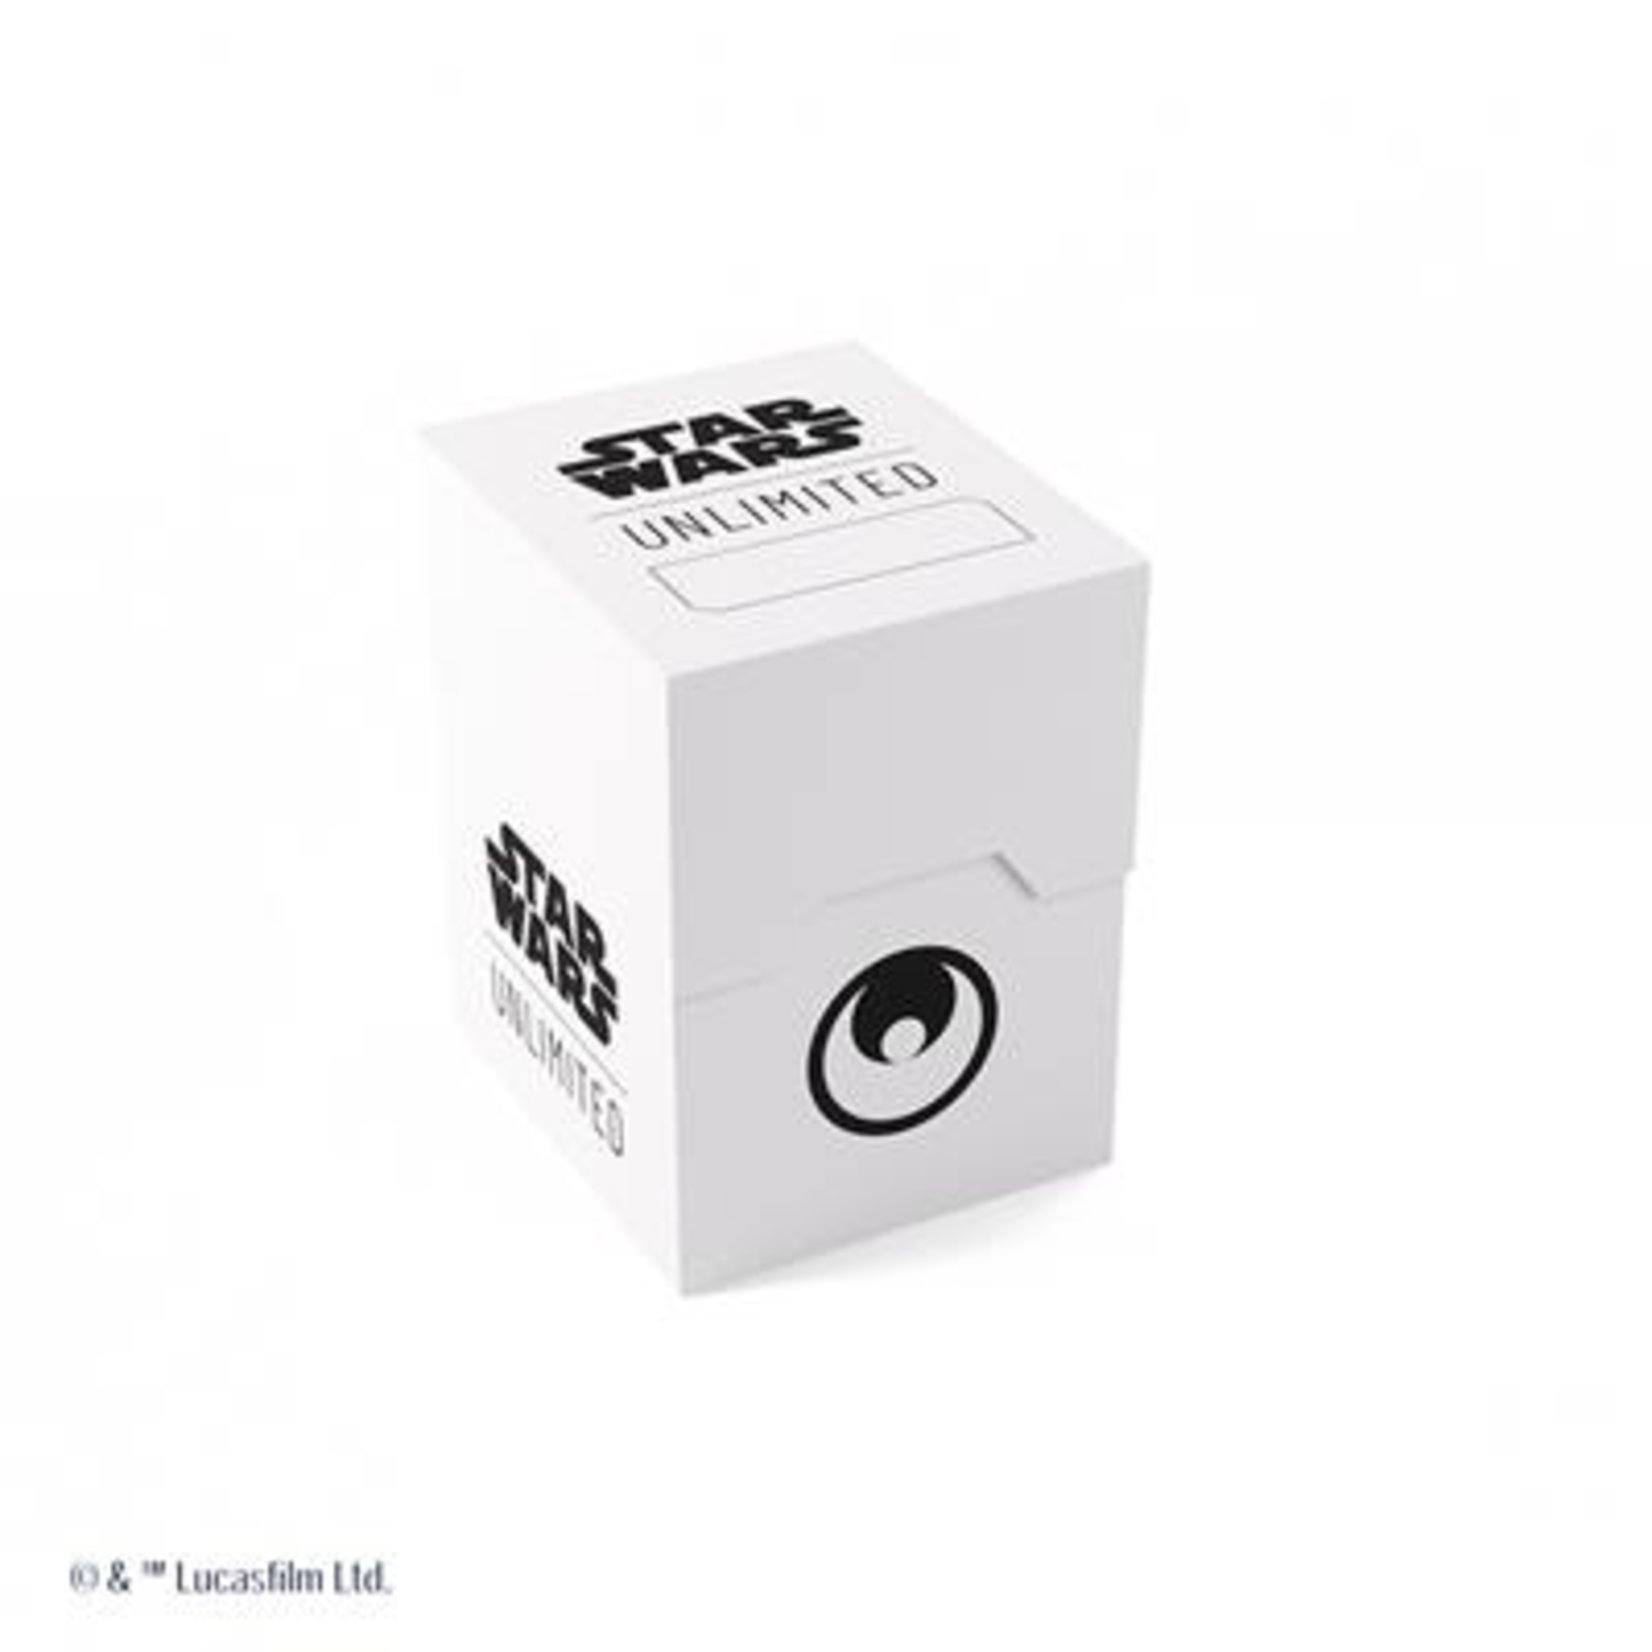 Gamegenic GameGenic Star Wars Unlimited Soft Crate Deck White and Black